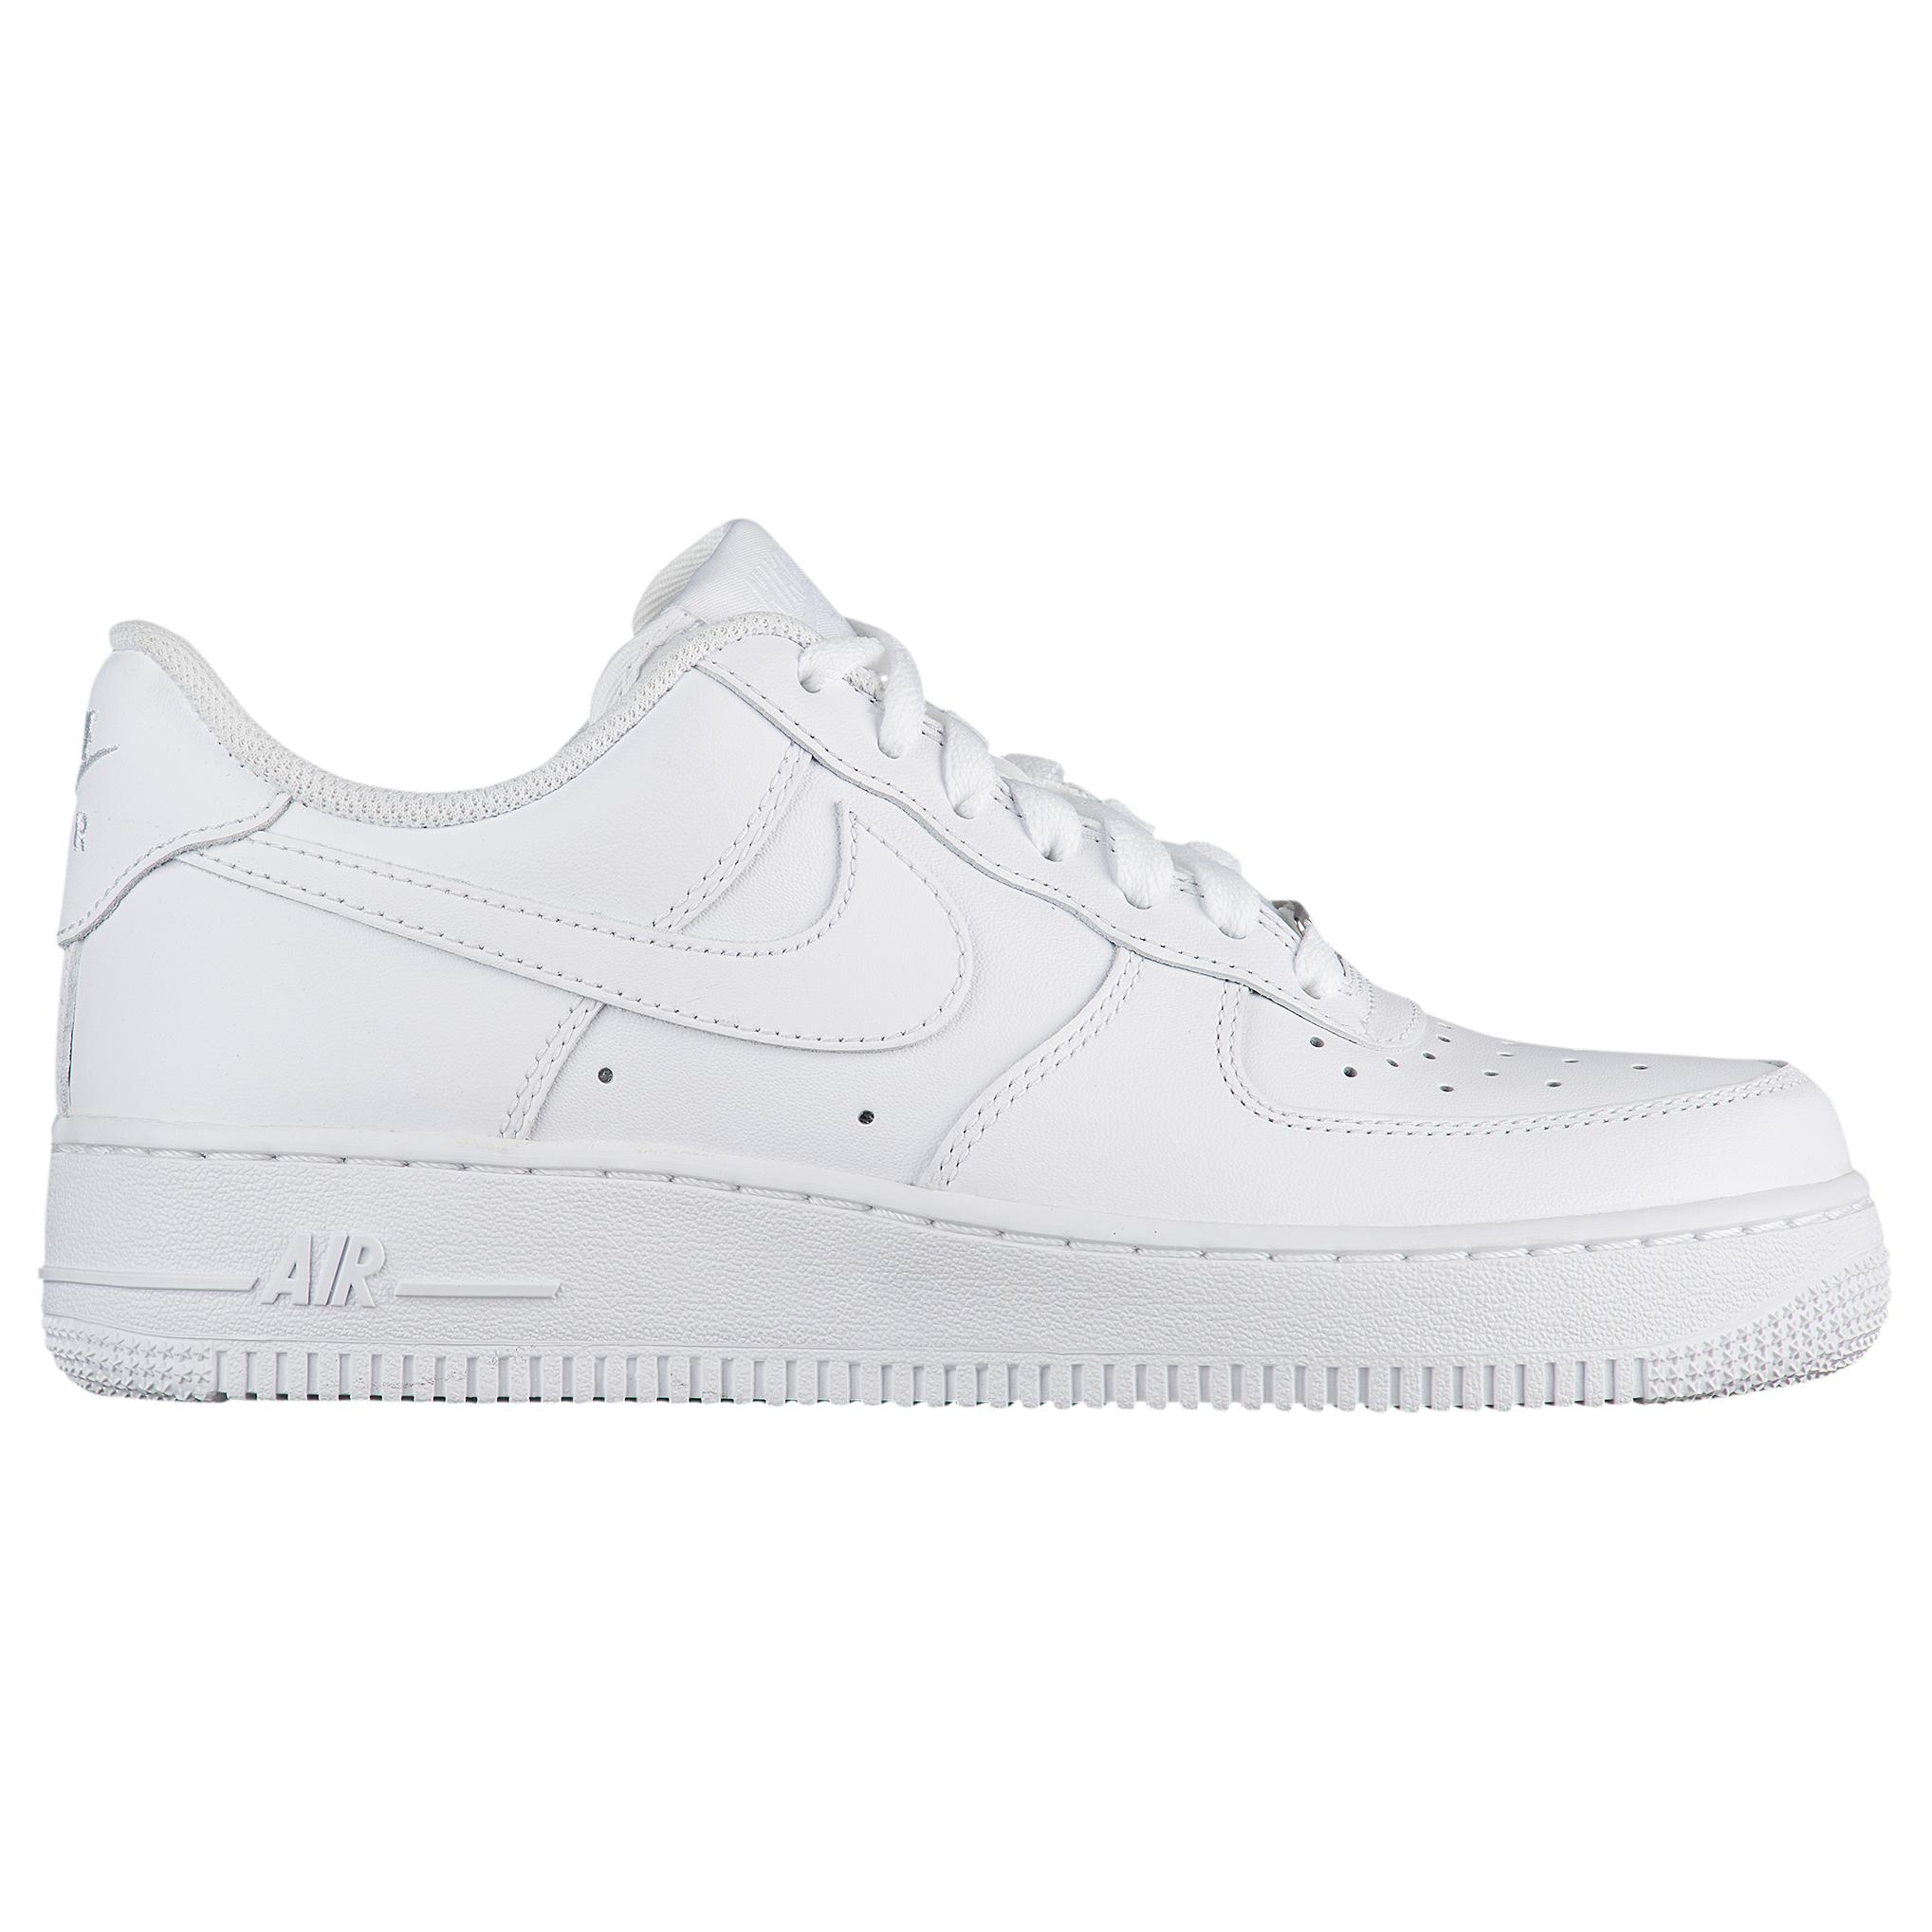 Nike Leather Air Force 1 07 Le Low - Shoes in White/White (White) - Save  10% - Lyst